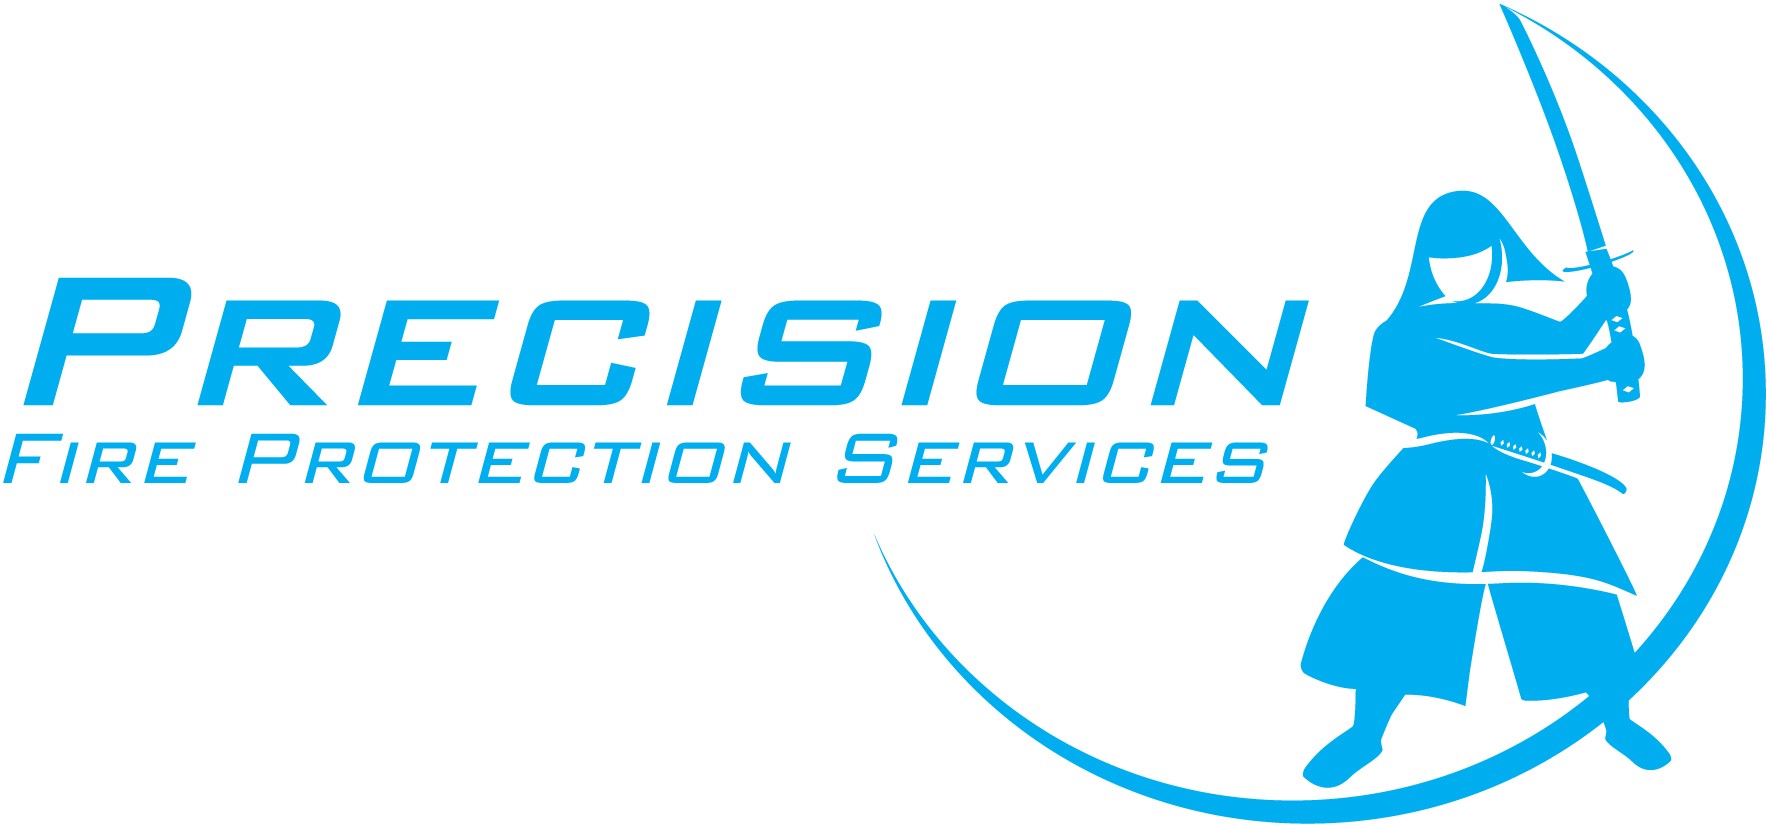 Precision Protection Services – Yes